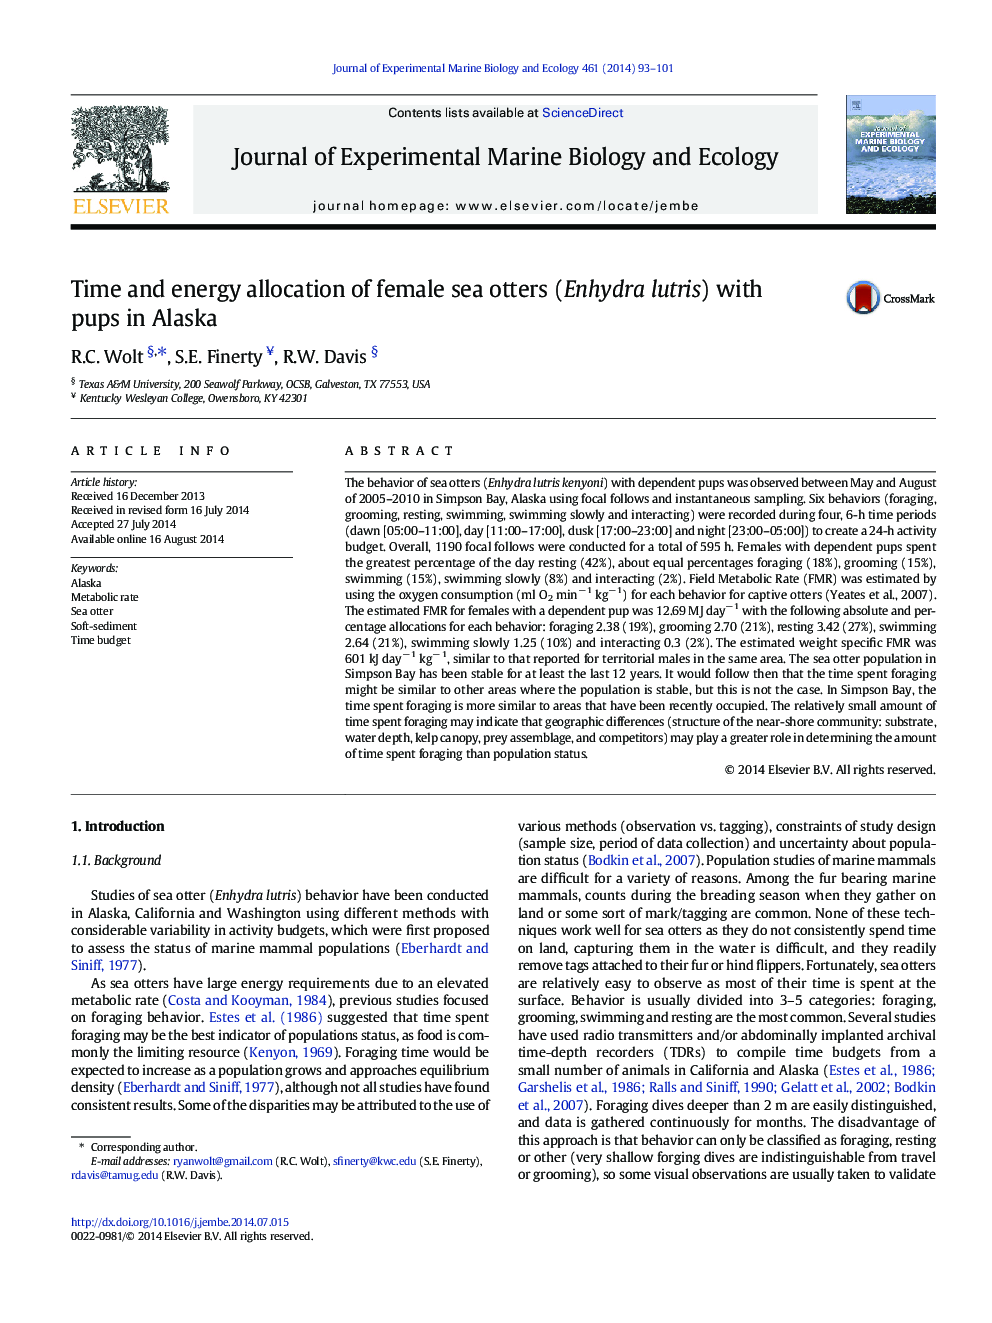 Time and energy allocation of female sea otters (Enhydra lutris) with pups in Alaska